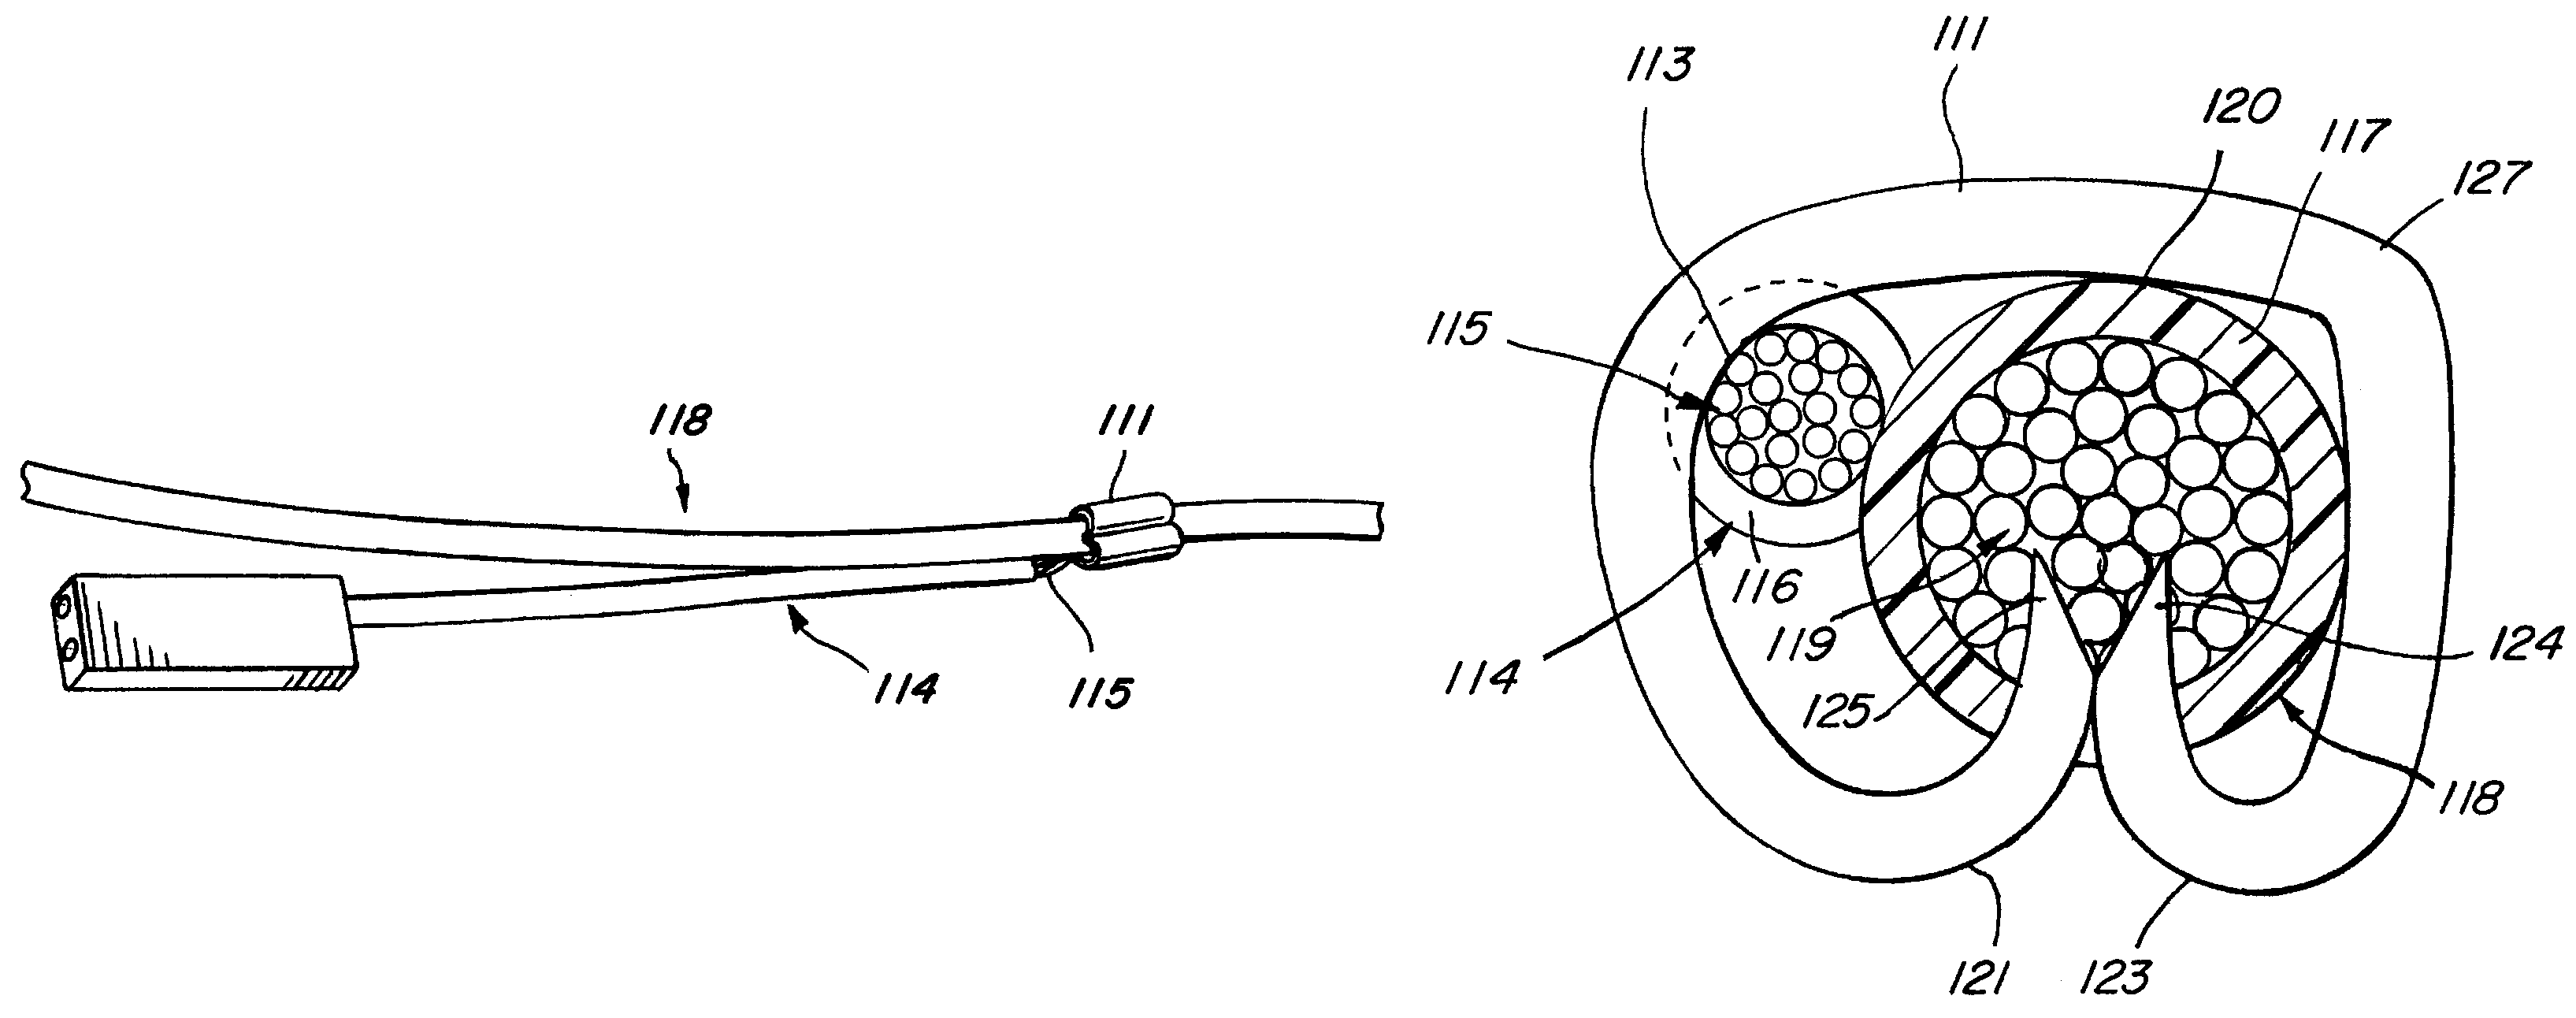 Wire harness interconnection and retention method and apparatus